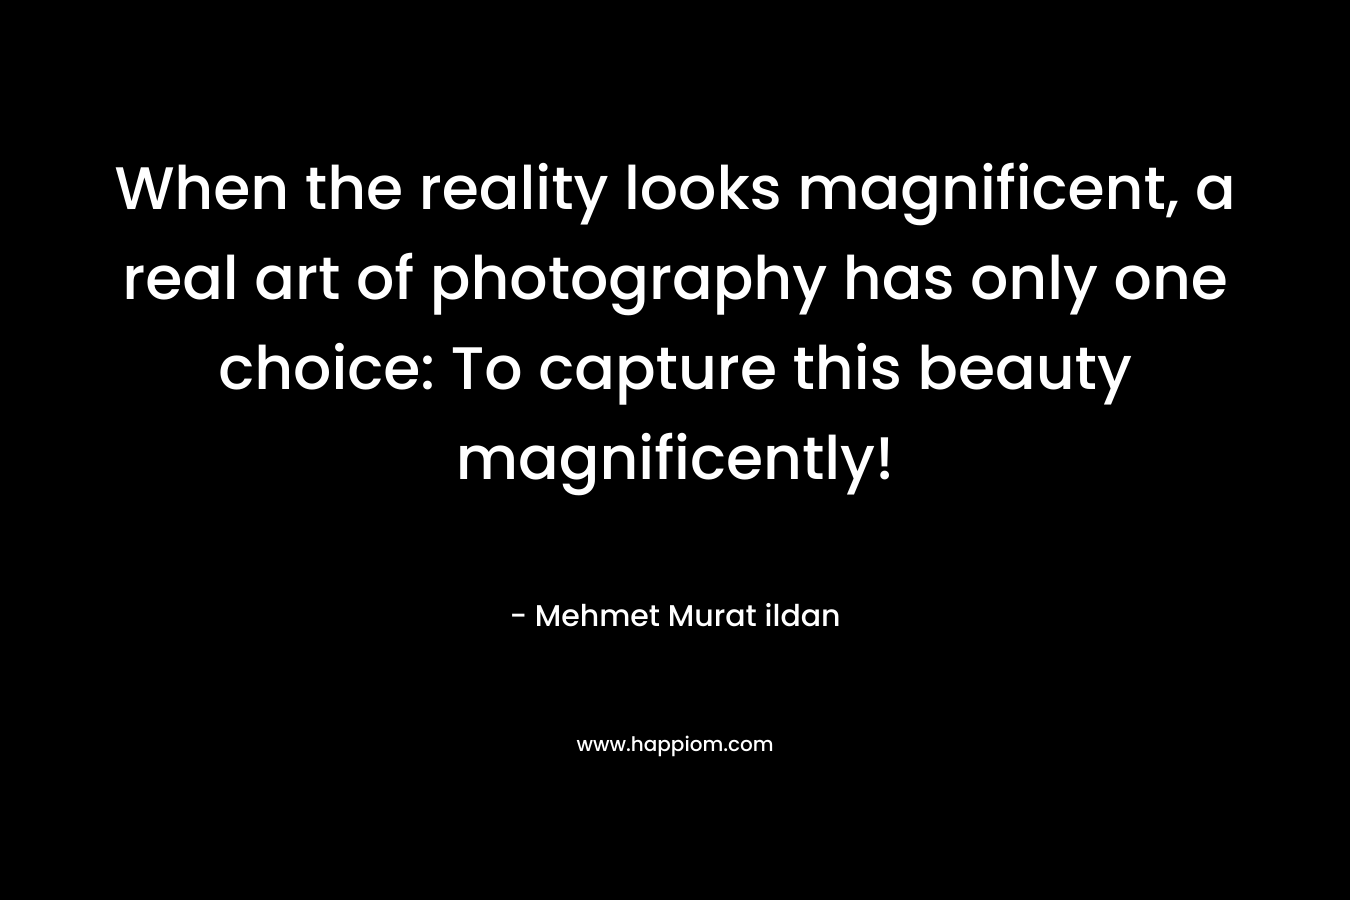 When the reality looks magnificent, a real art of photography has only one choice: To capture this beauty magnificently! – Mehmet Murat ildan